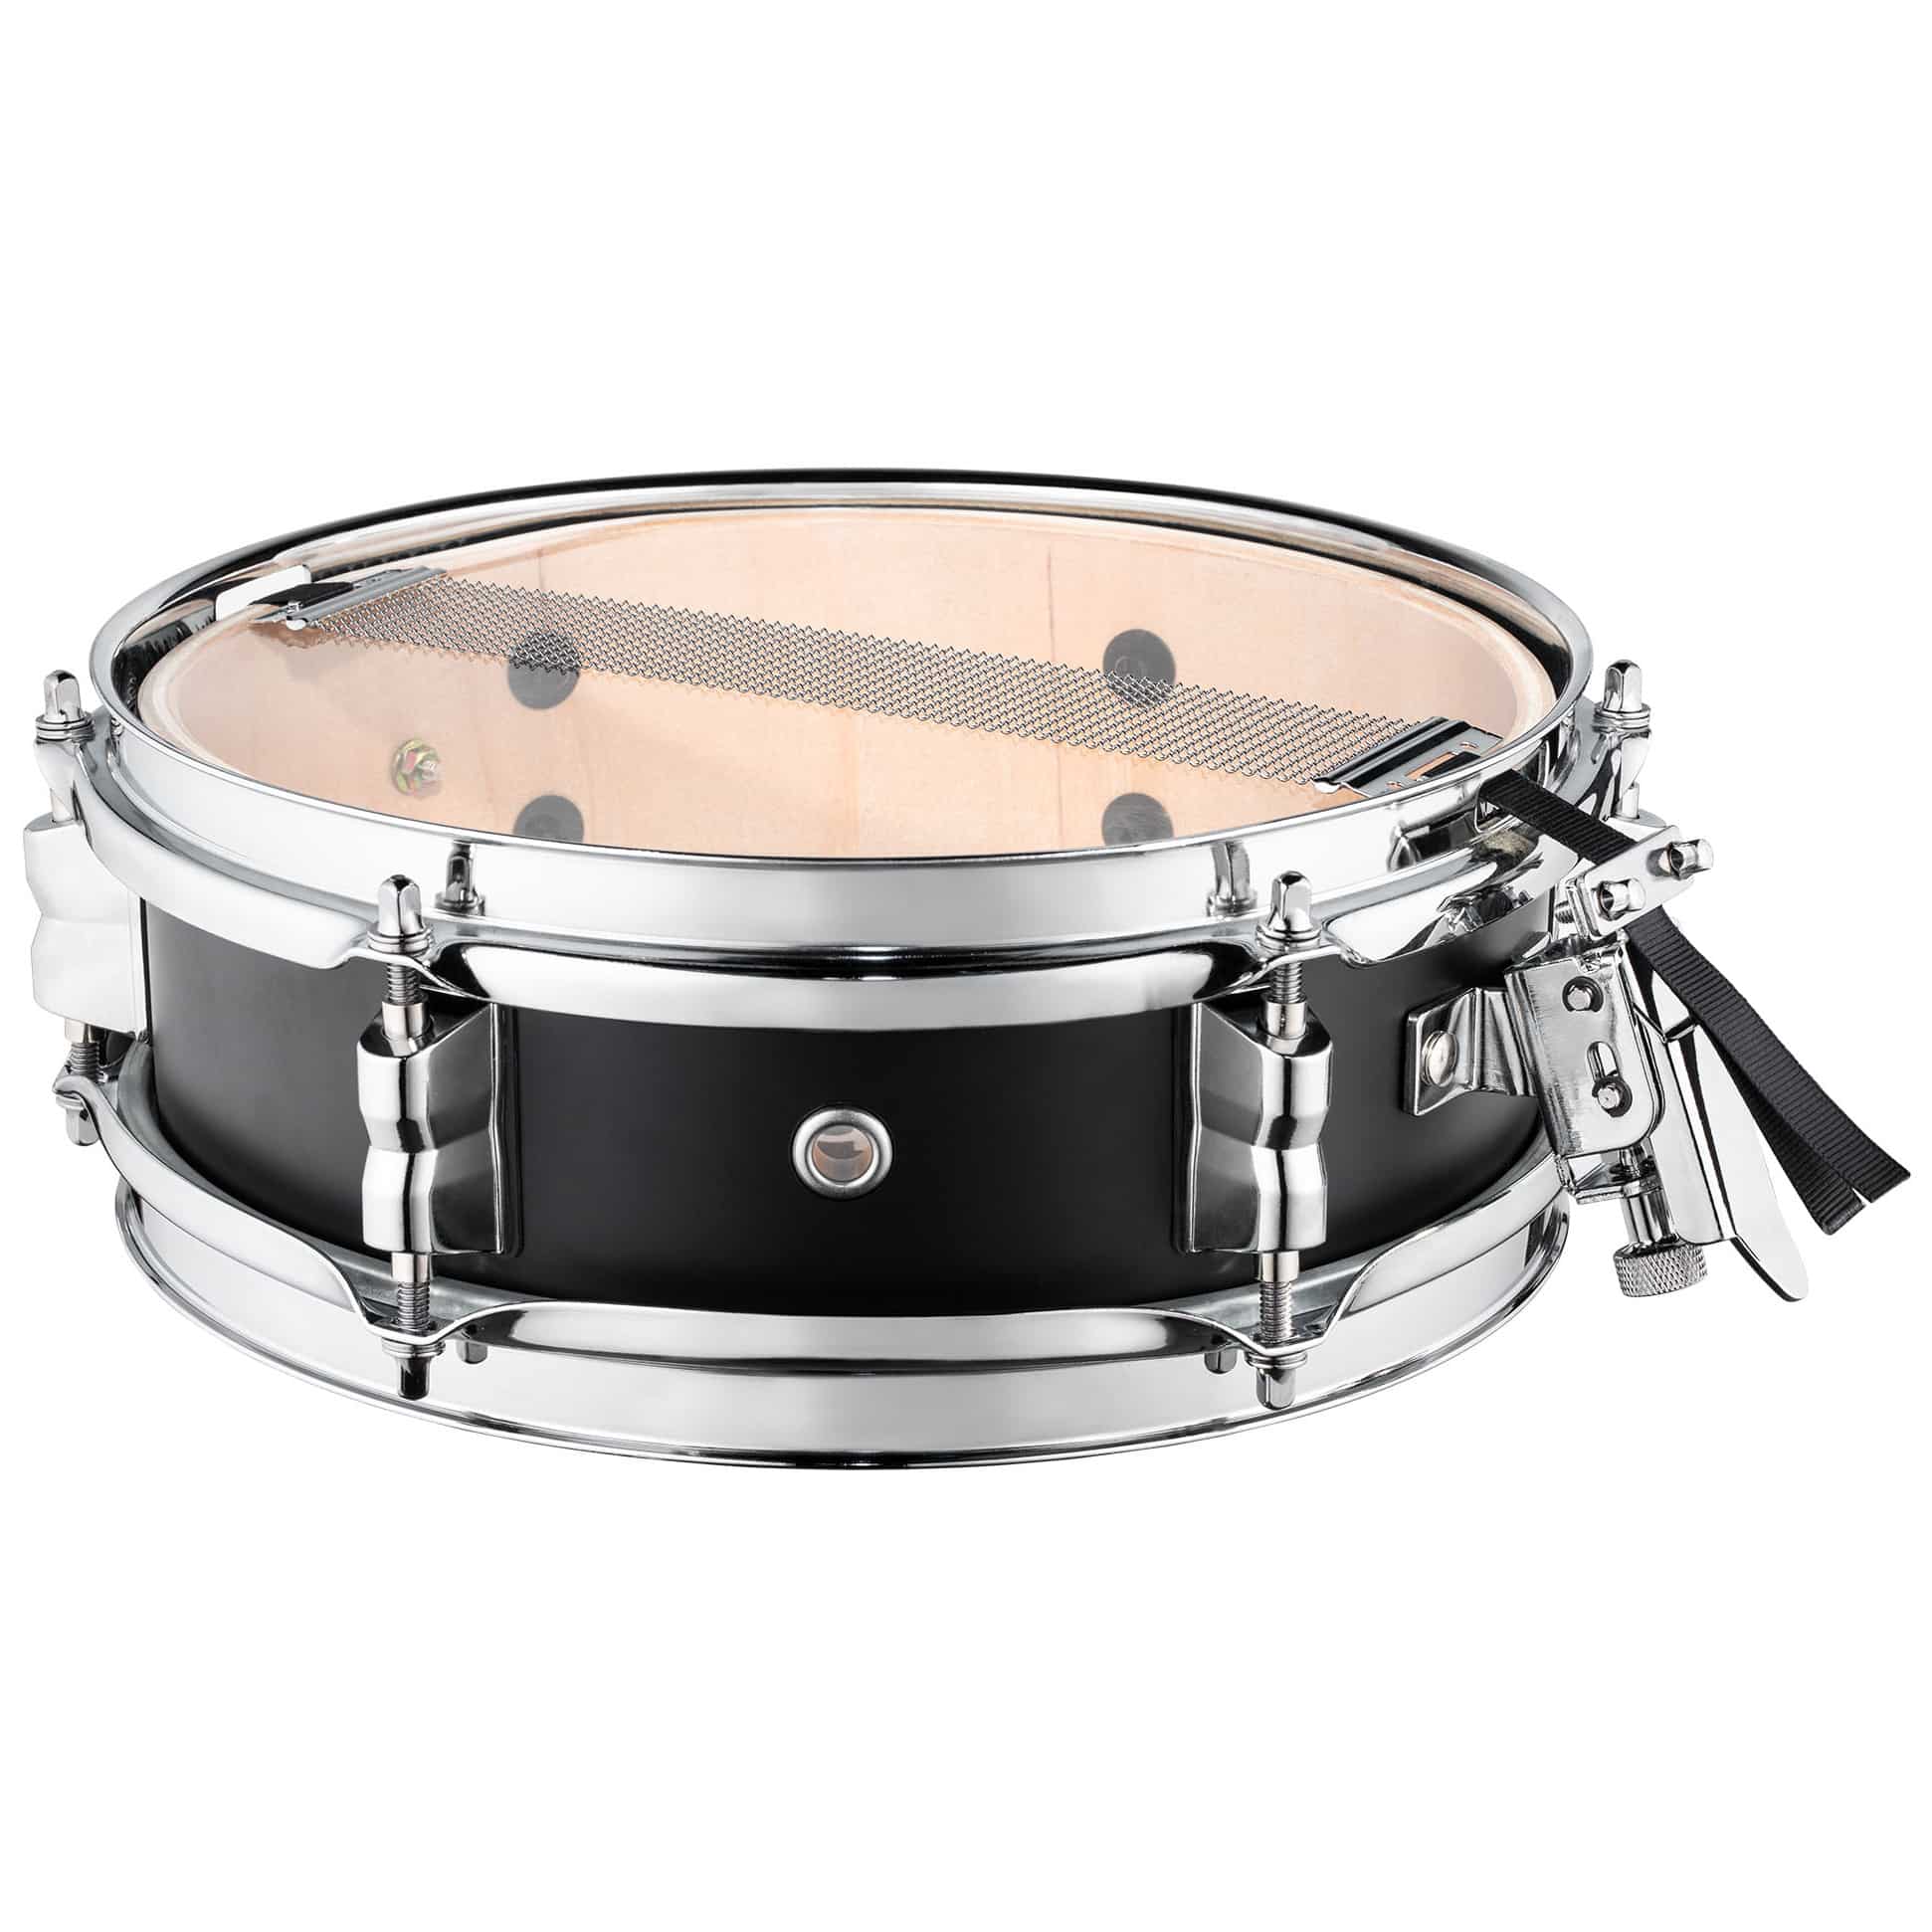 Meinl Percussion MPCSS - Compact Side Snare Drum 10" 2